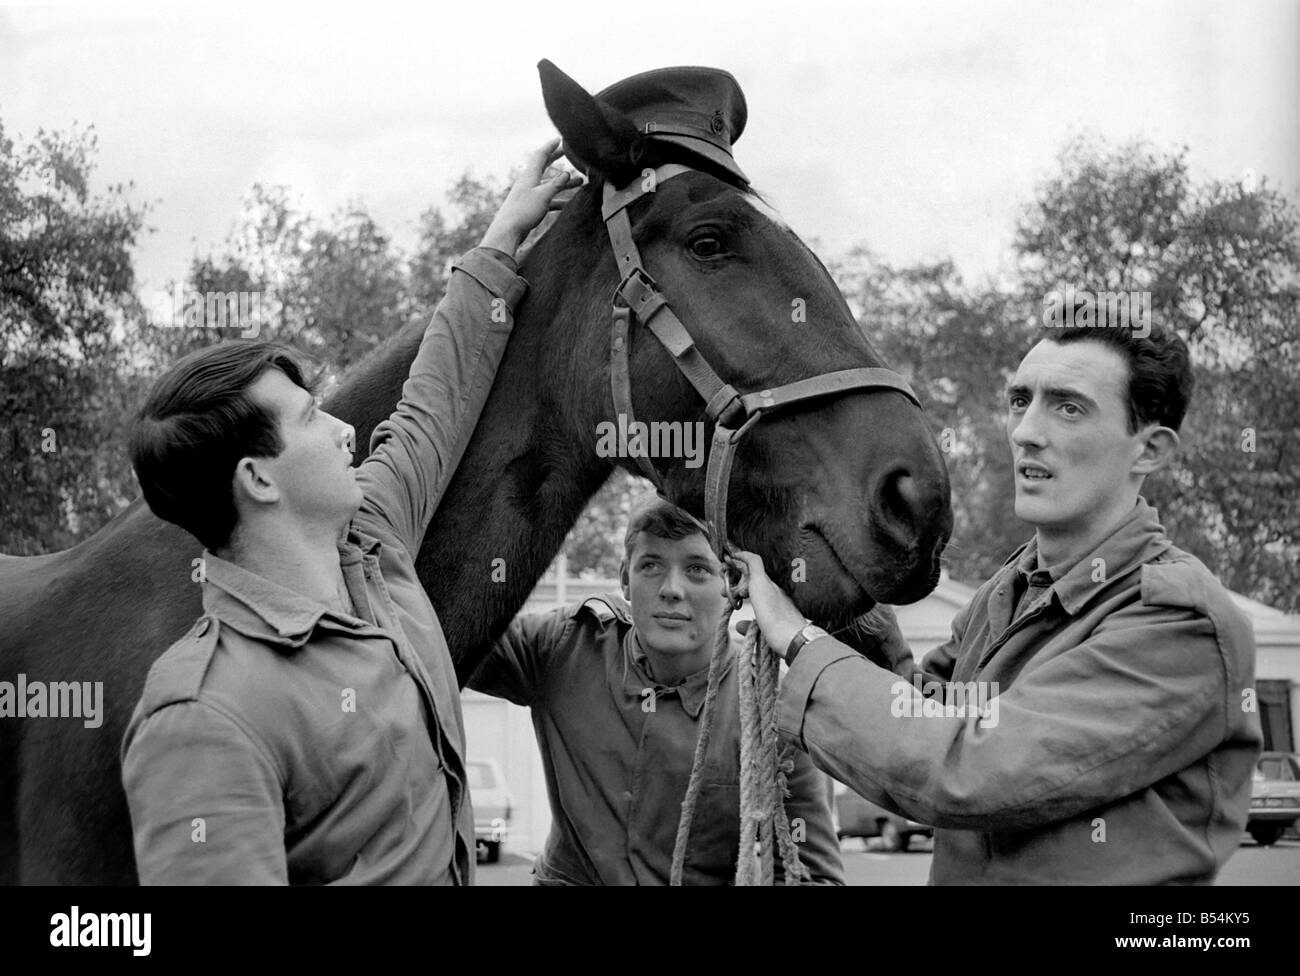 Stalin a young gelding who is one of the Queen's unwanted horses, has been given a reprieve and an attempt to re-train him is about to begin. November 1969 Z11167-003 Stock Photo